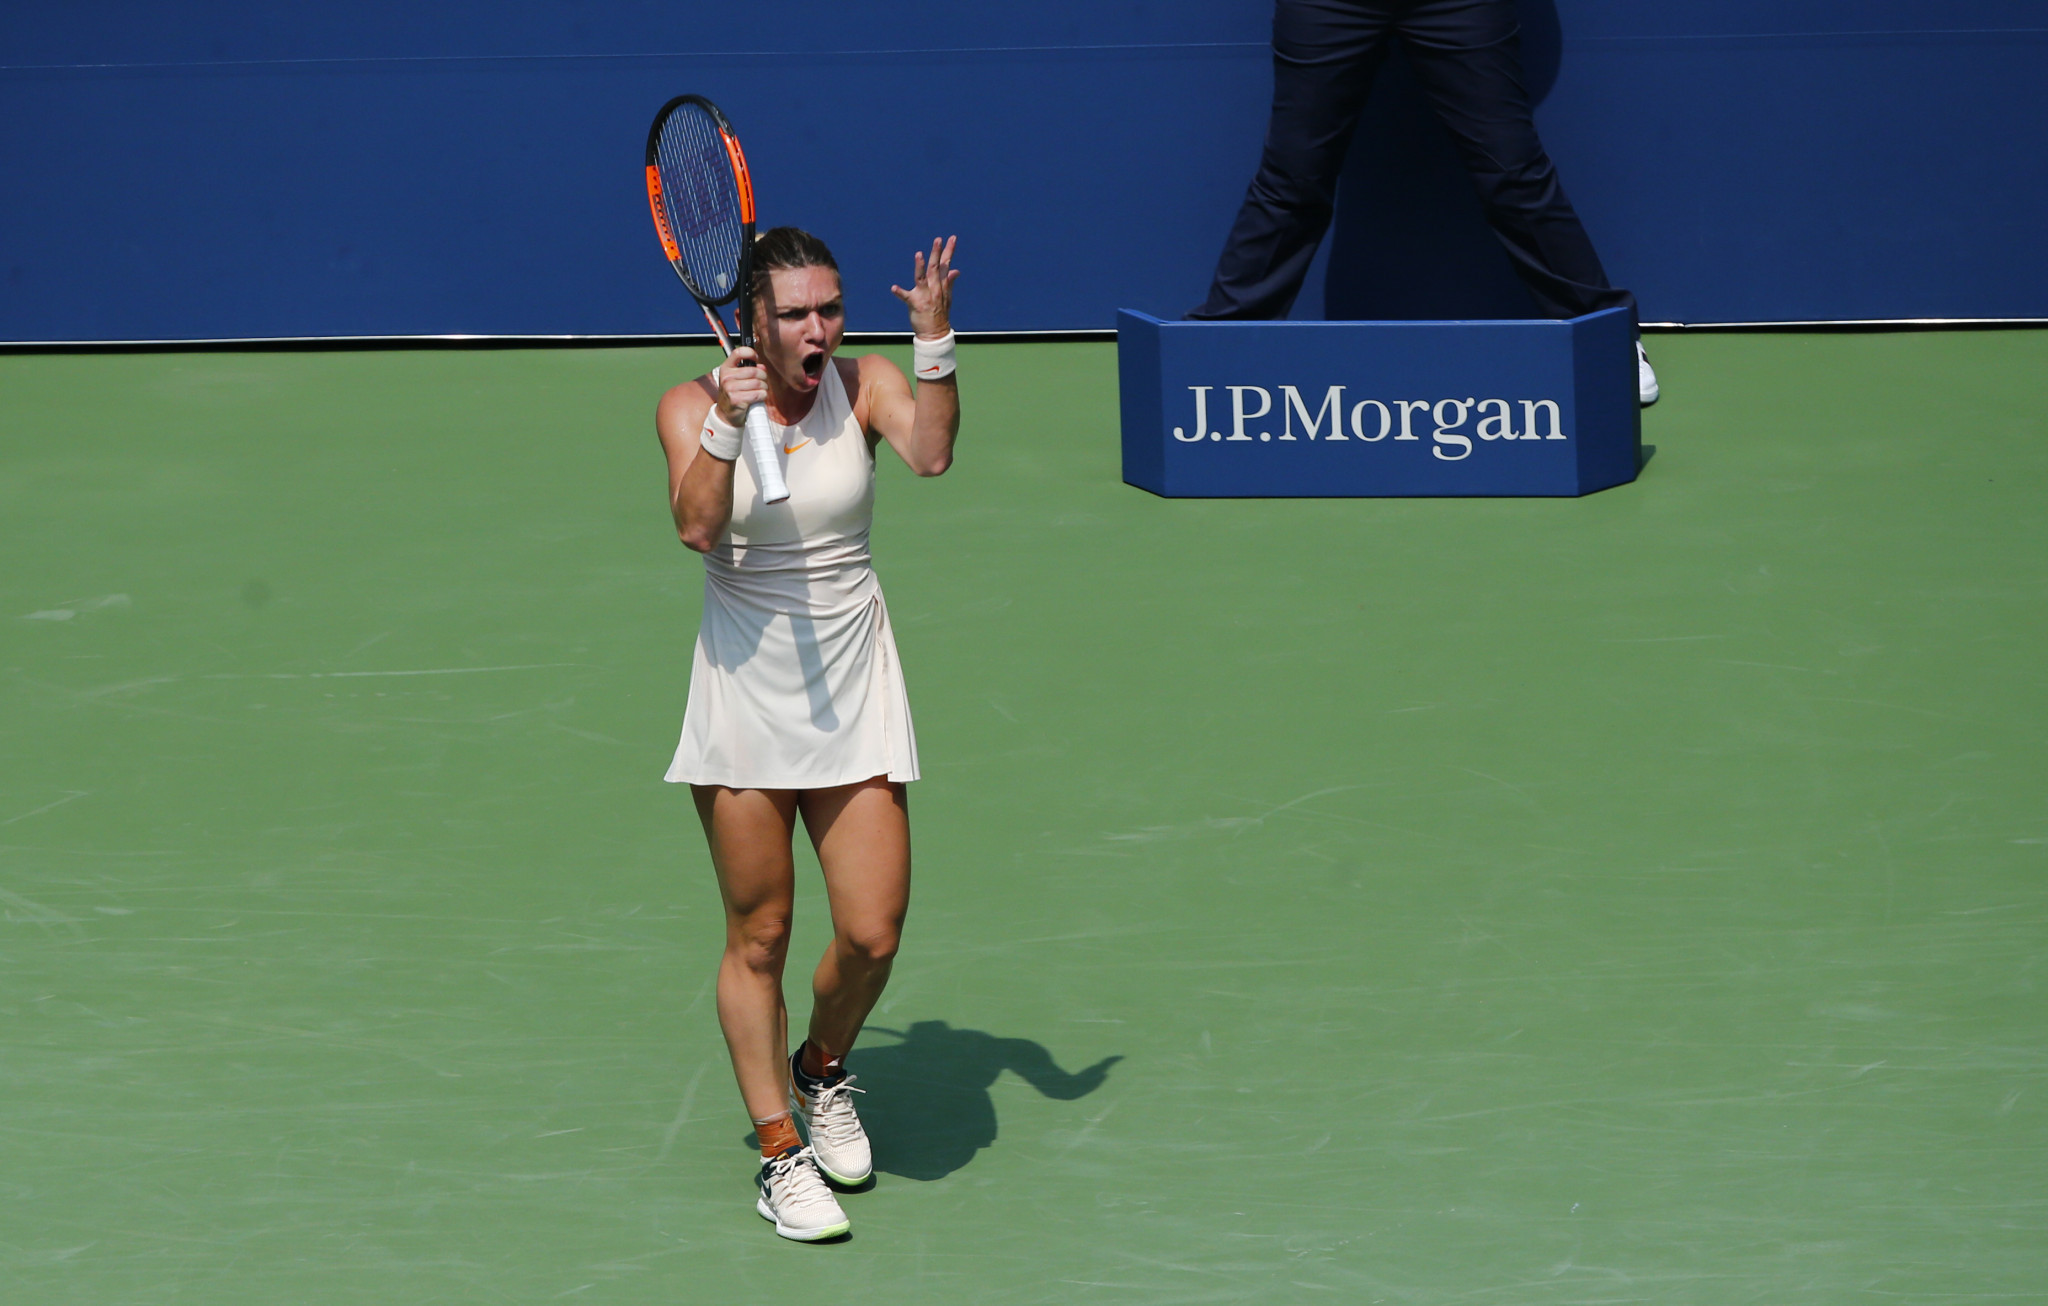 Women's top seed Halep exits in round one of US Open